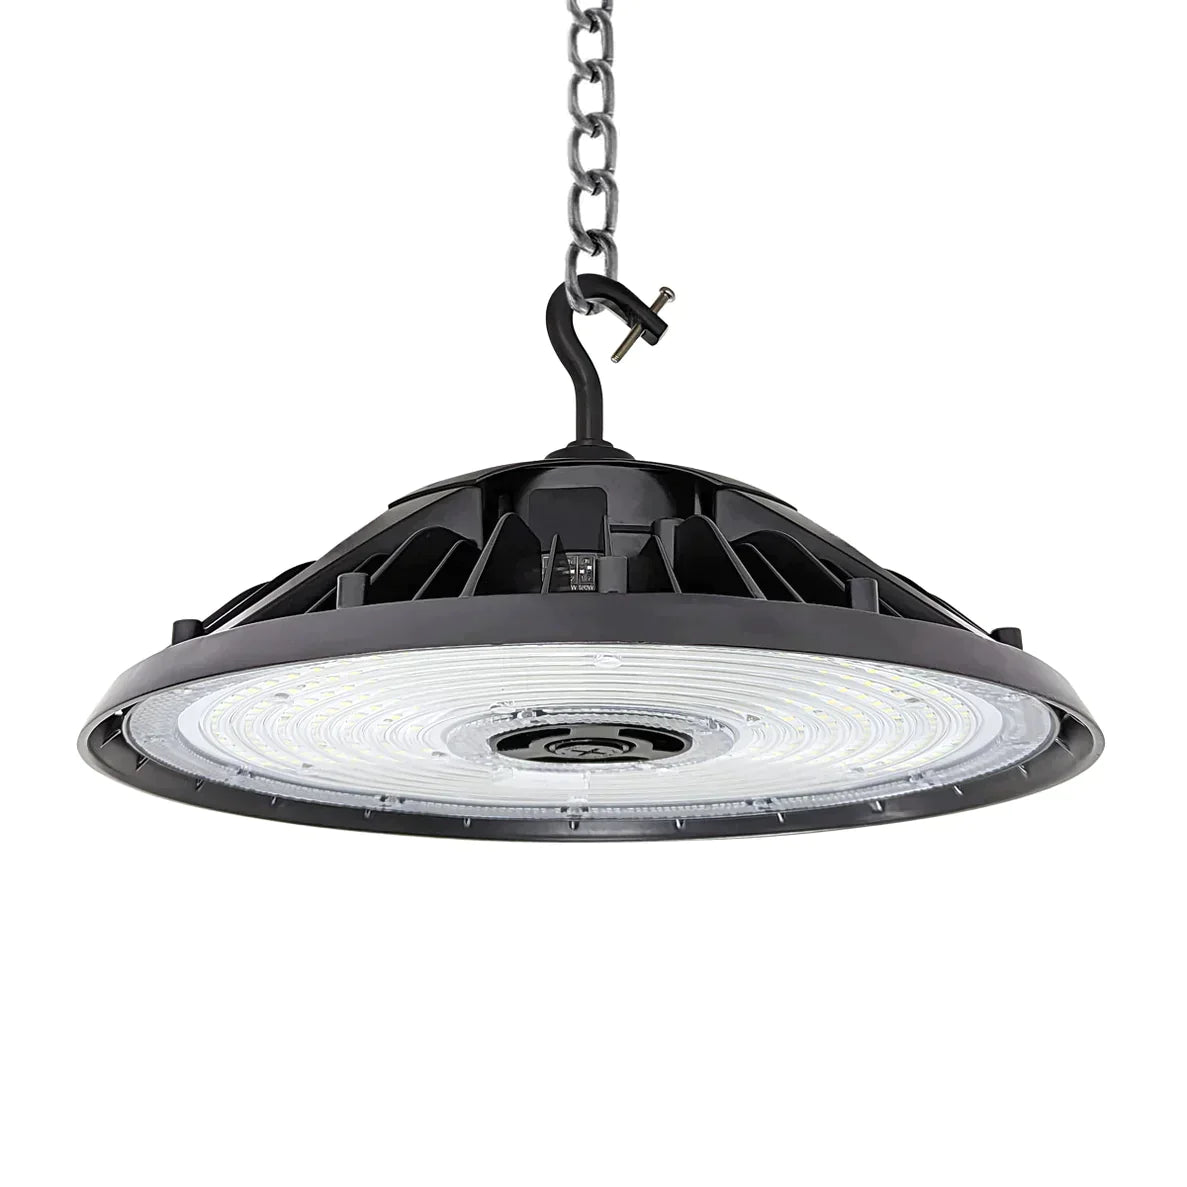 RHB04-150W Selectable High Lumen UFO LED High Bay - Up to 26,000 Lumens